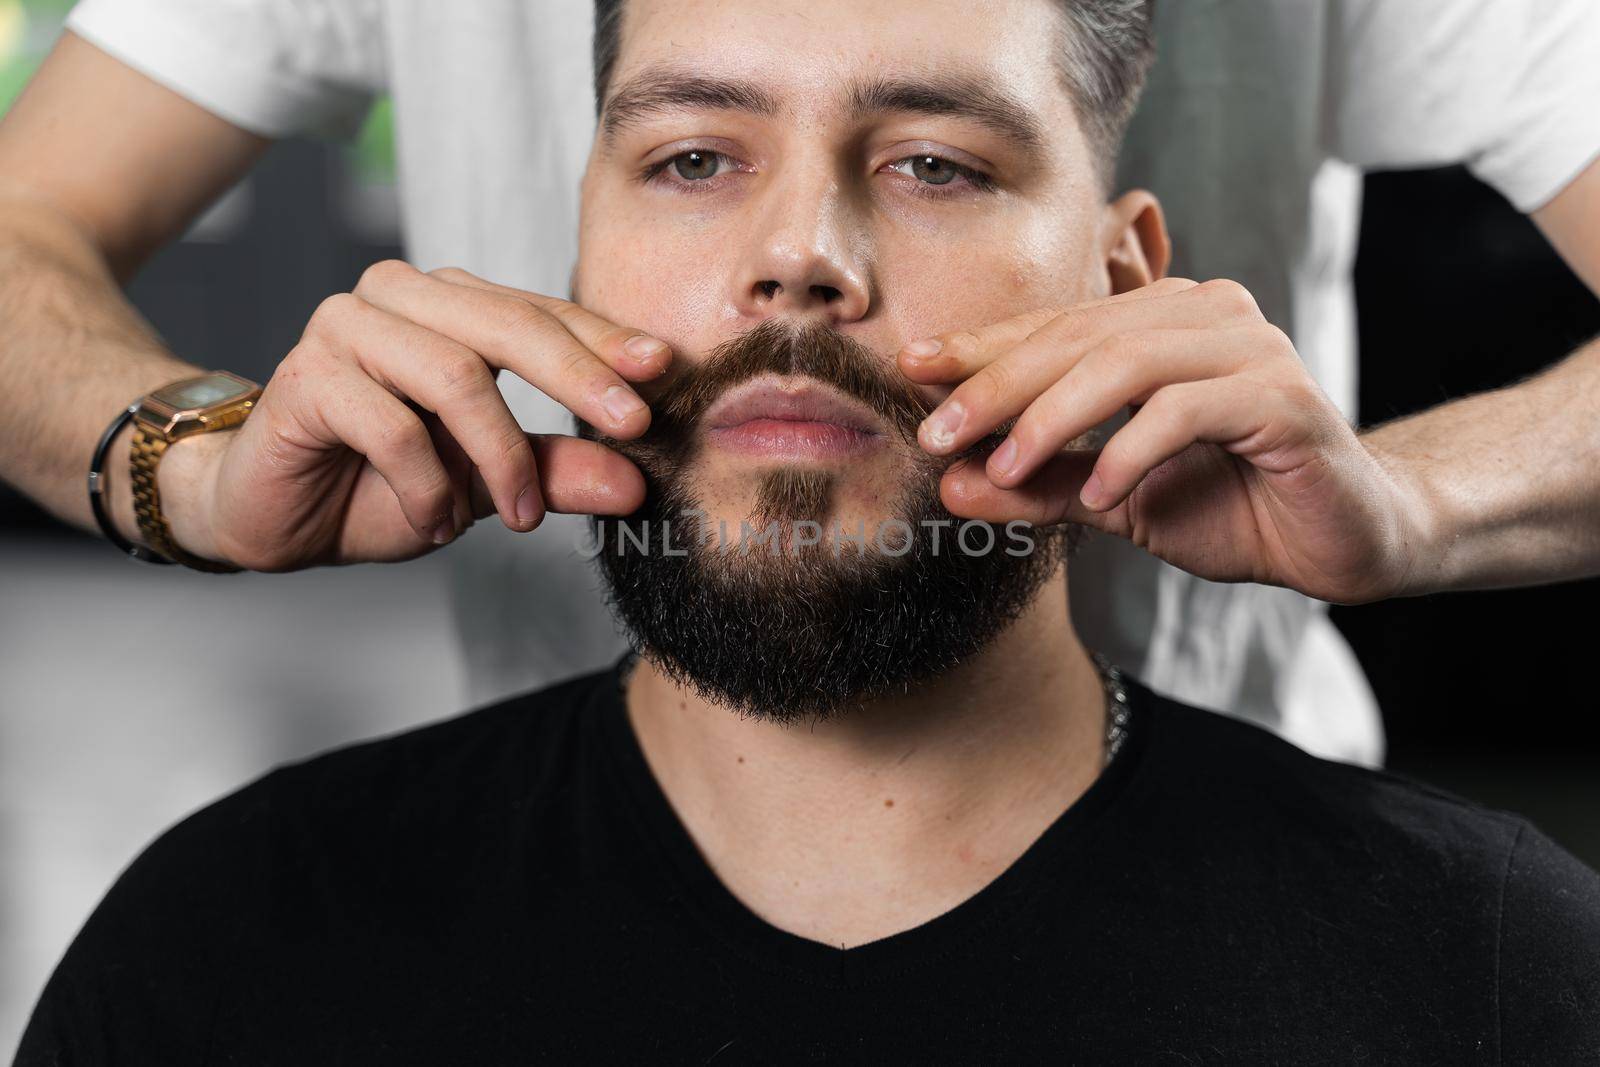 Fixing the shape of mustache with wax. The result of a haircut in a barbershop